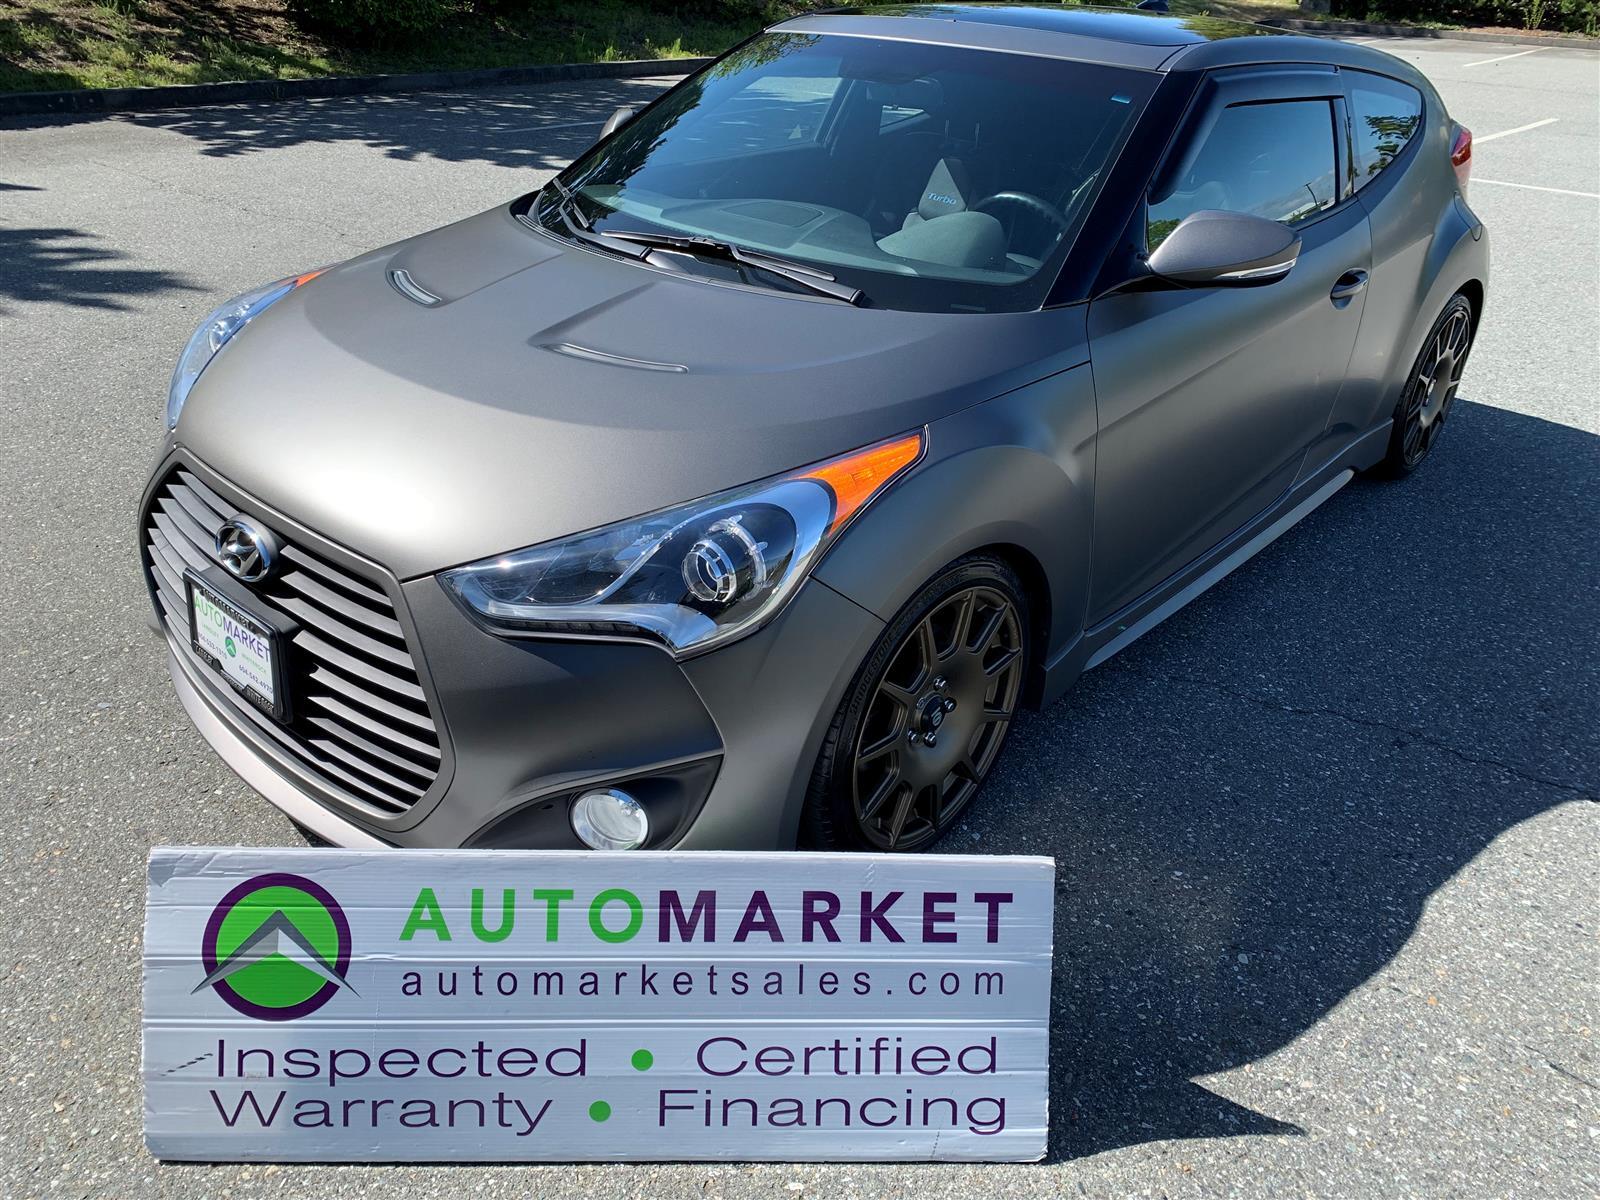 2013 Hyundai Veloster TURBO, IMMACULATE, FINANCING, WARRANTY, INSPECTED 